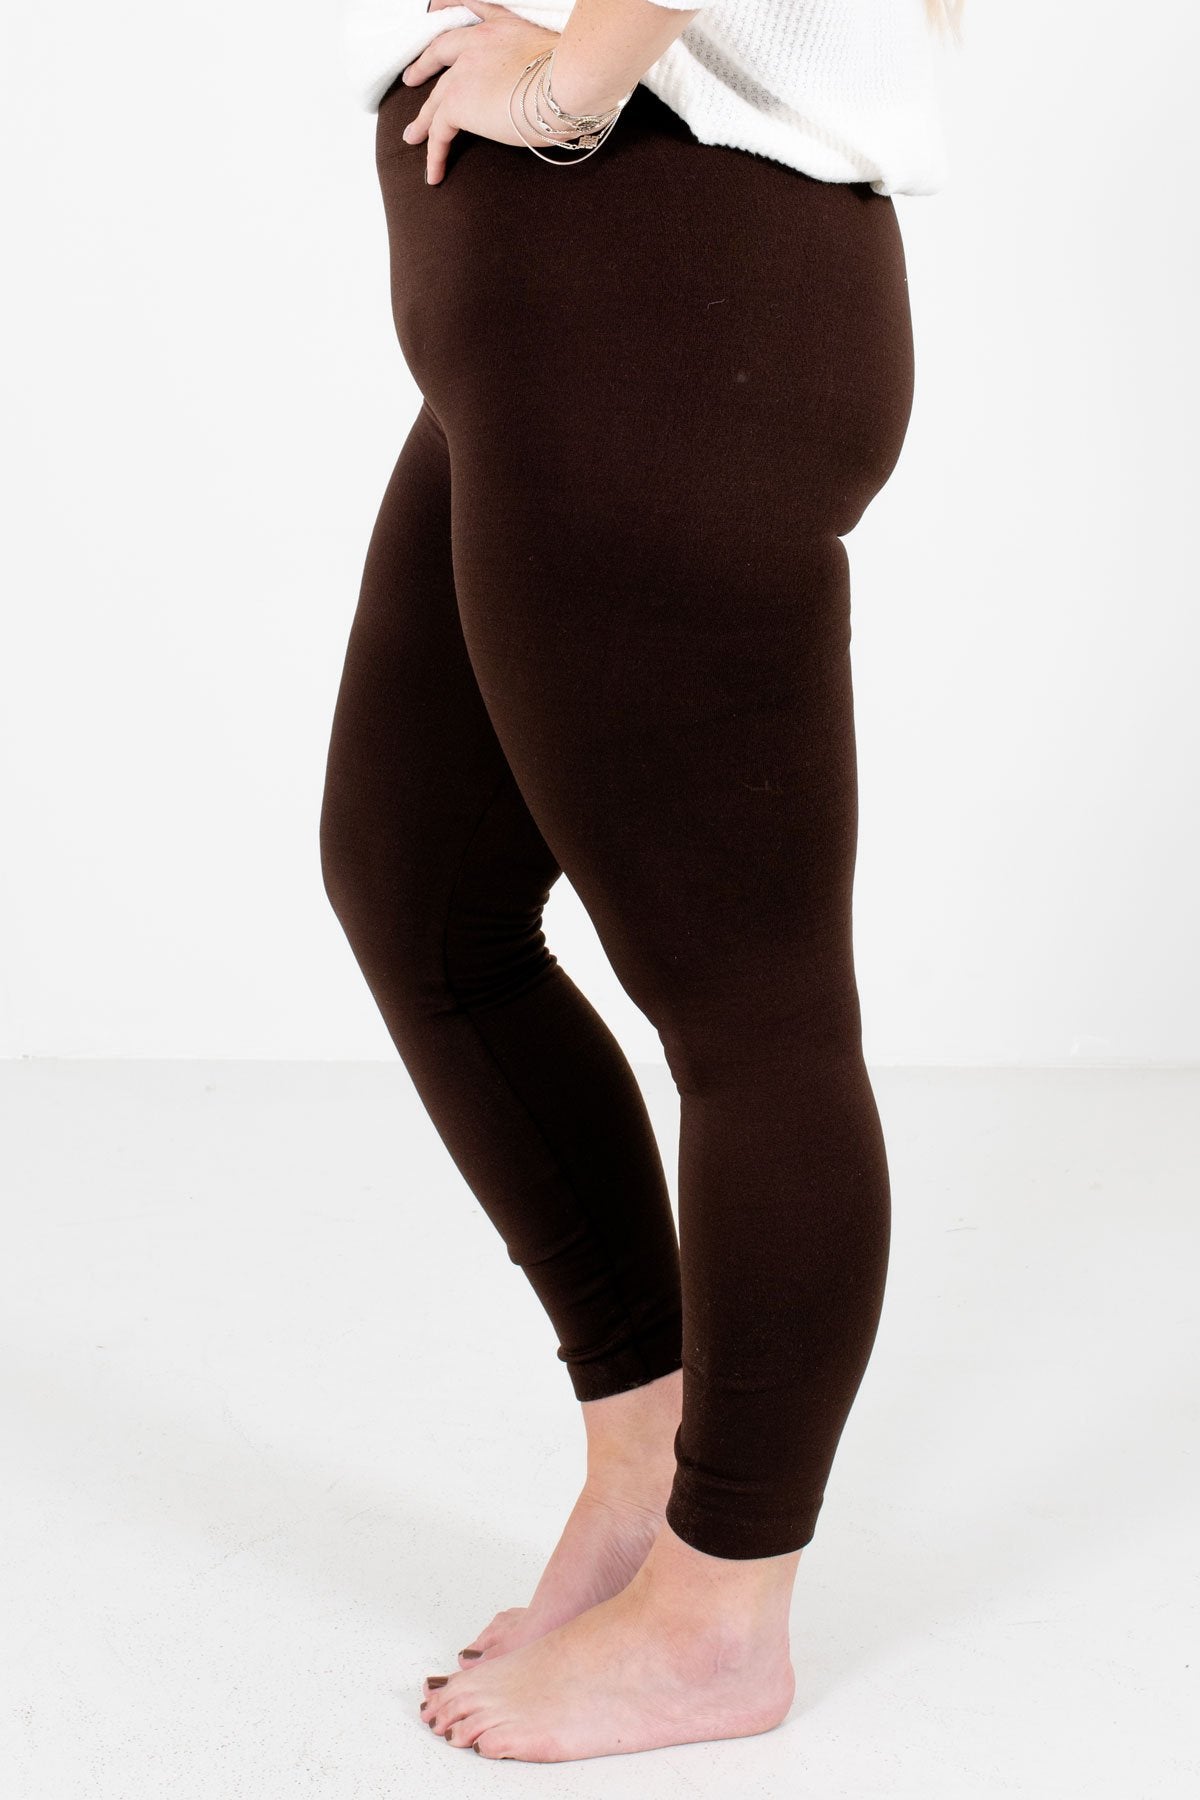 Brown Soft High-Quality Boutique Leggings for Women